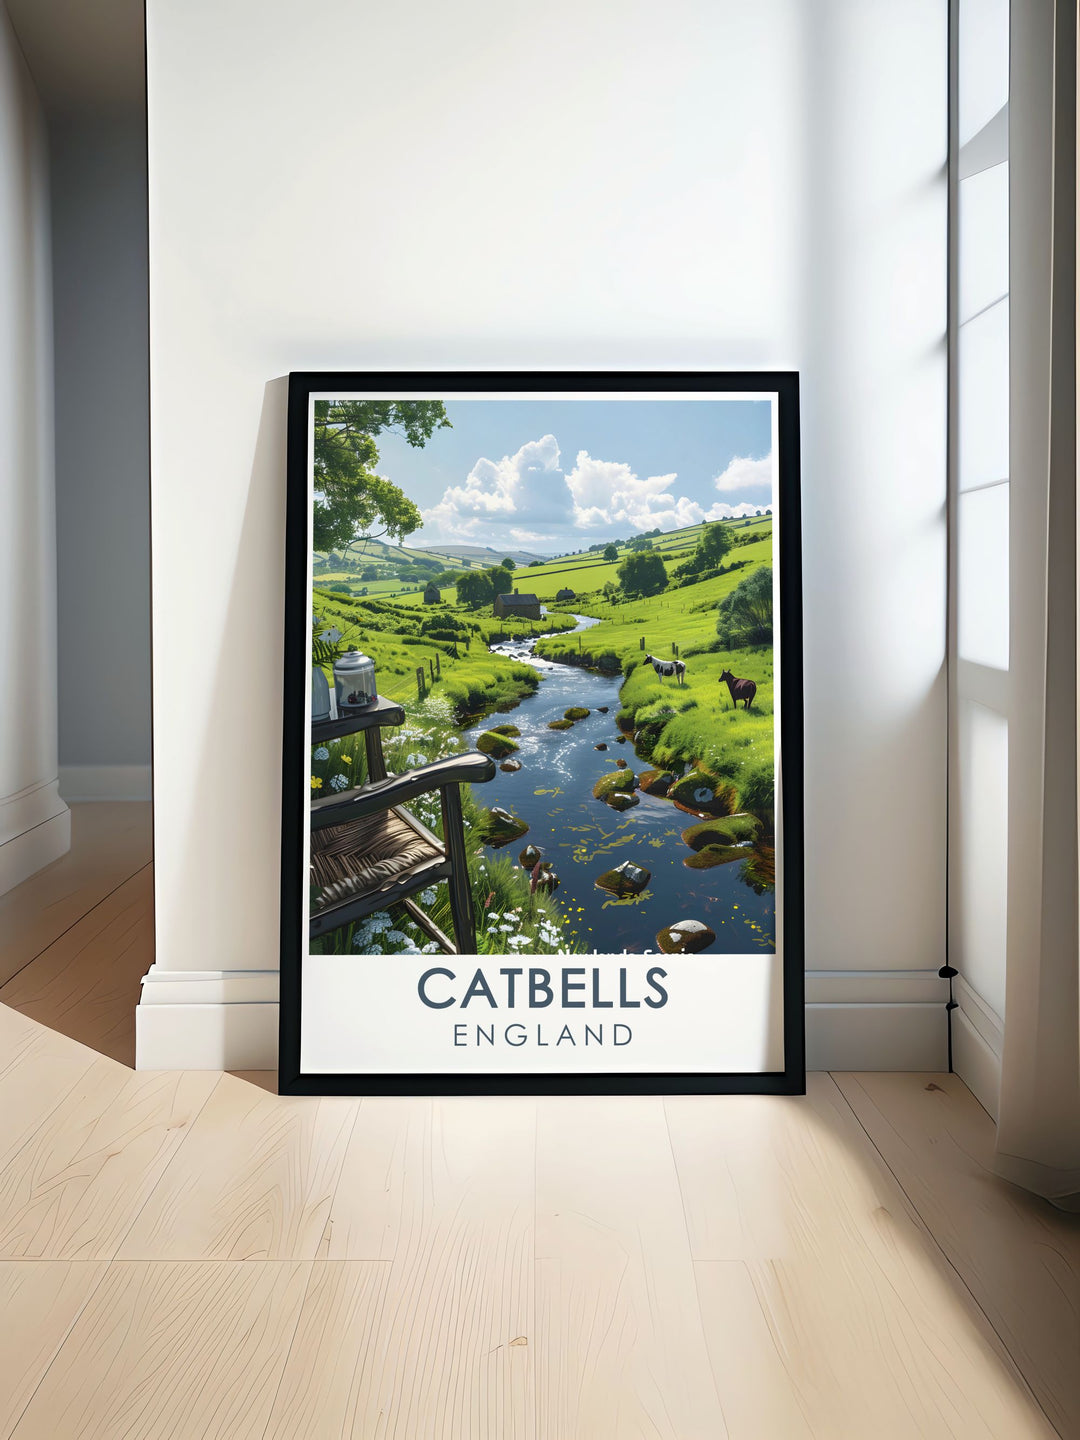 Catbells Summit art print capturing the stunning Lake District landscape and Newlands Valley perfect for adding a touch of natural beauty to any room or as a unique travel gift for nature lovers and adventure seekers